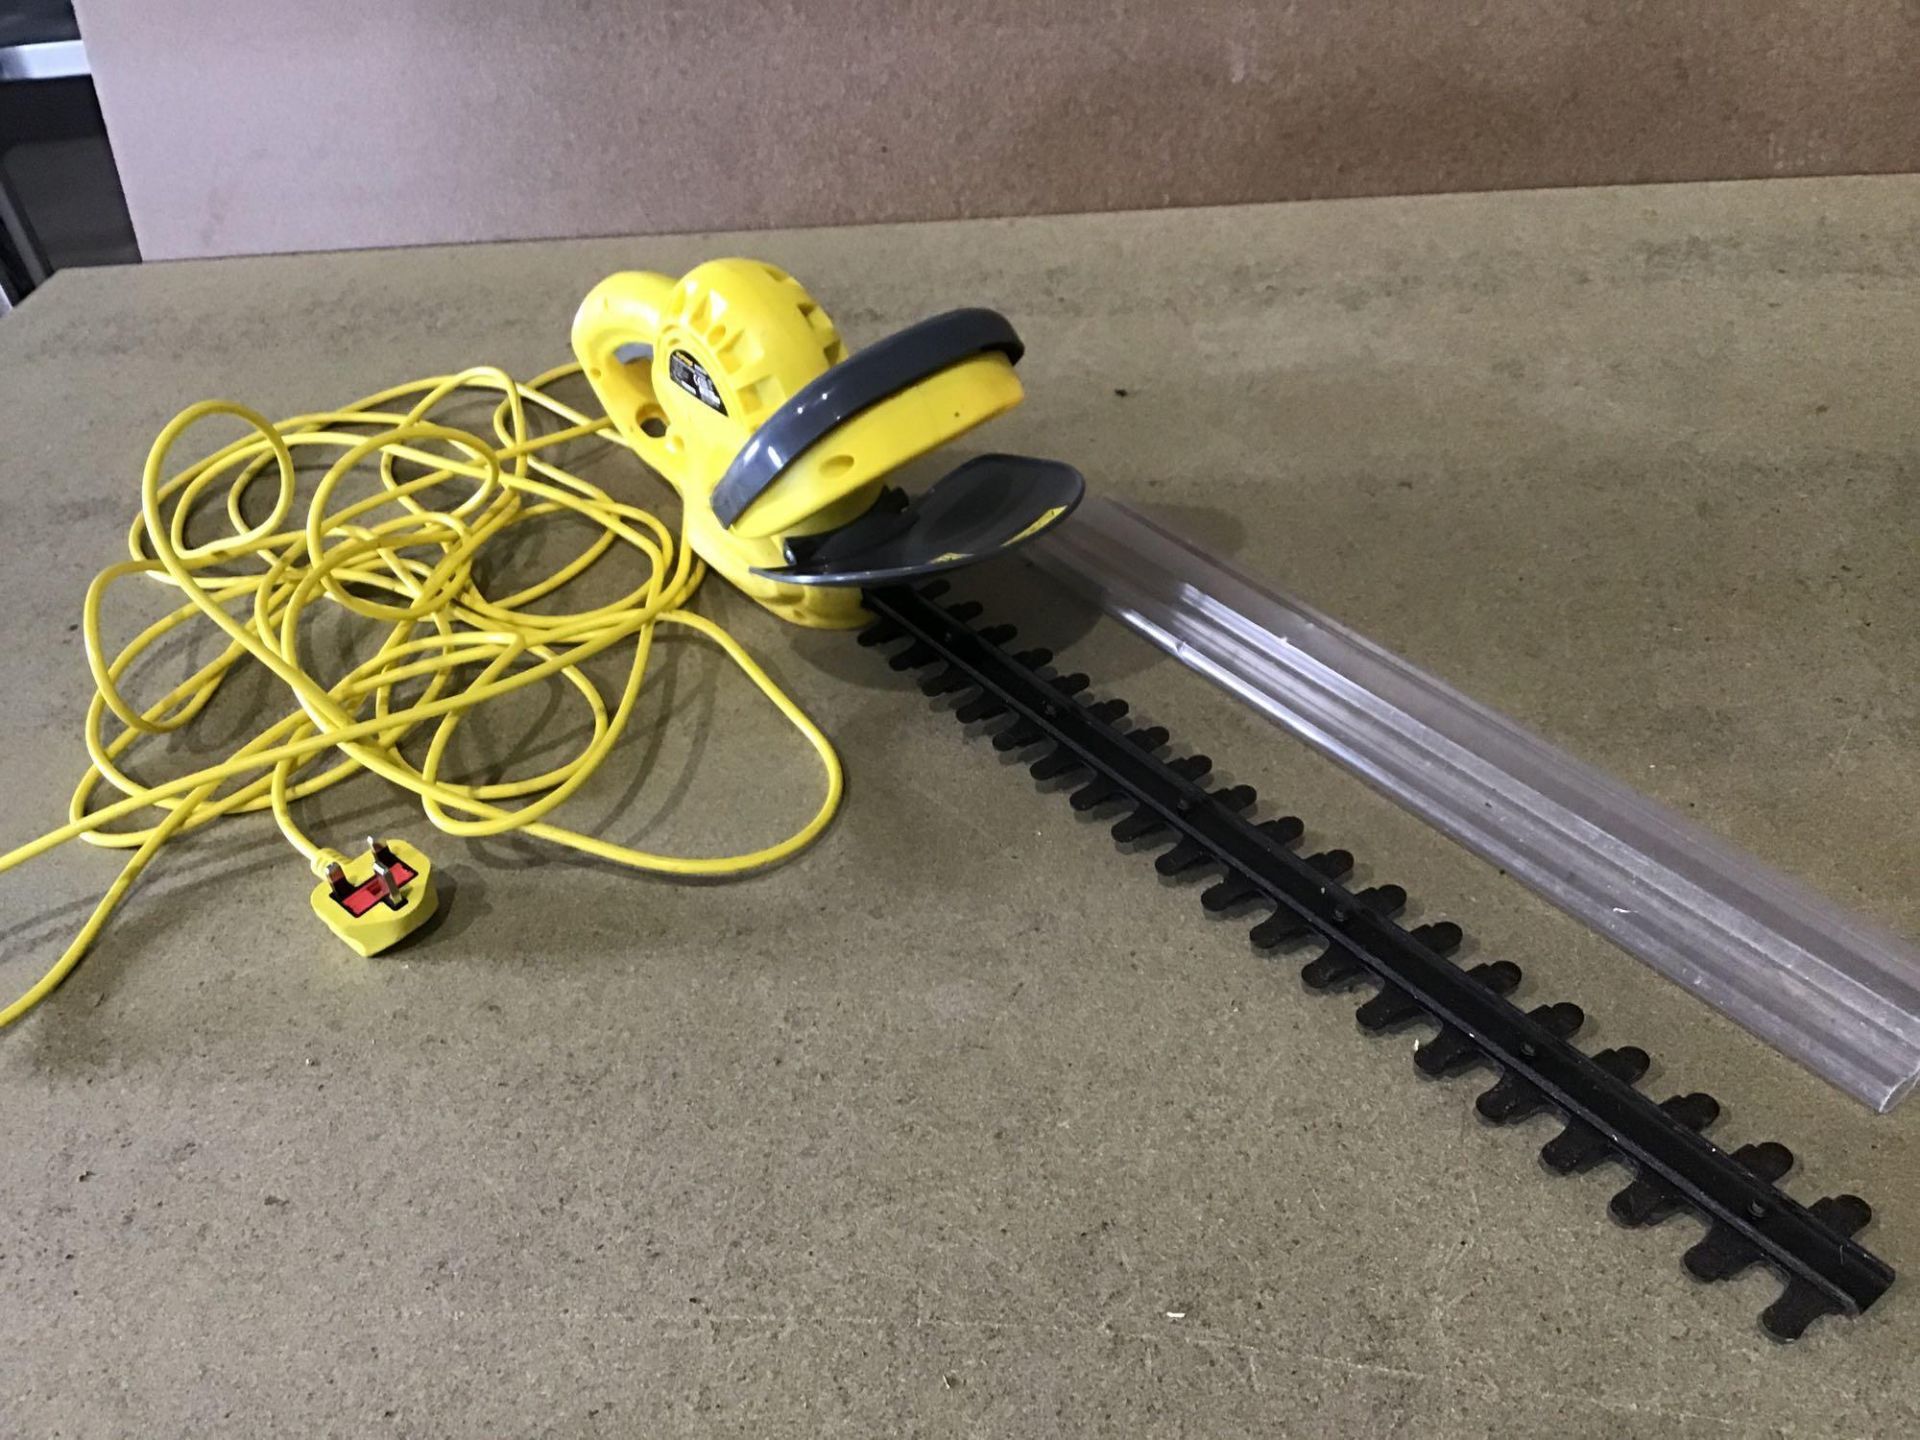 challenge 55cm corded hedge trimmer - 550w